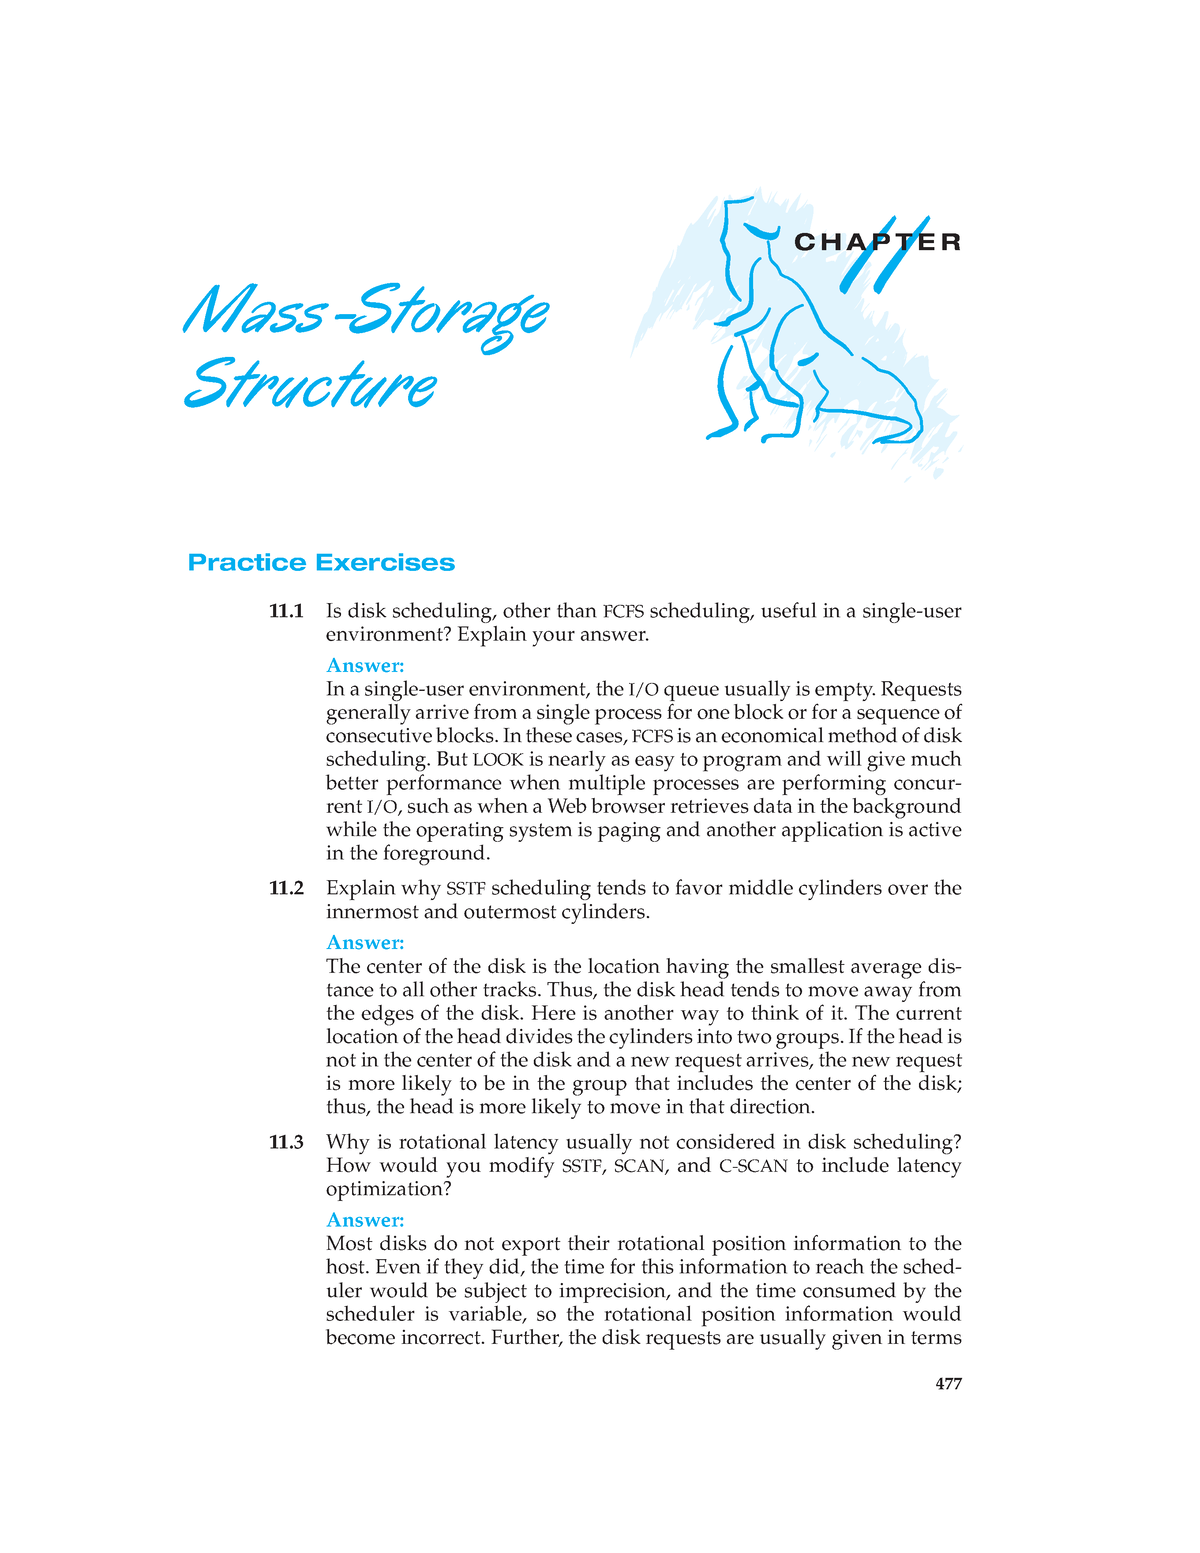 Operating Systems: Mass-Storage Structure